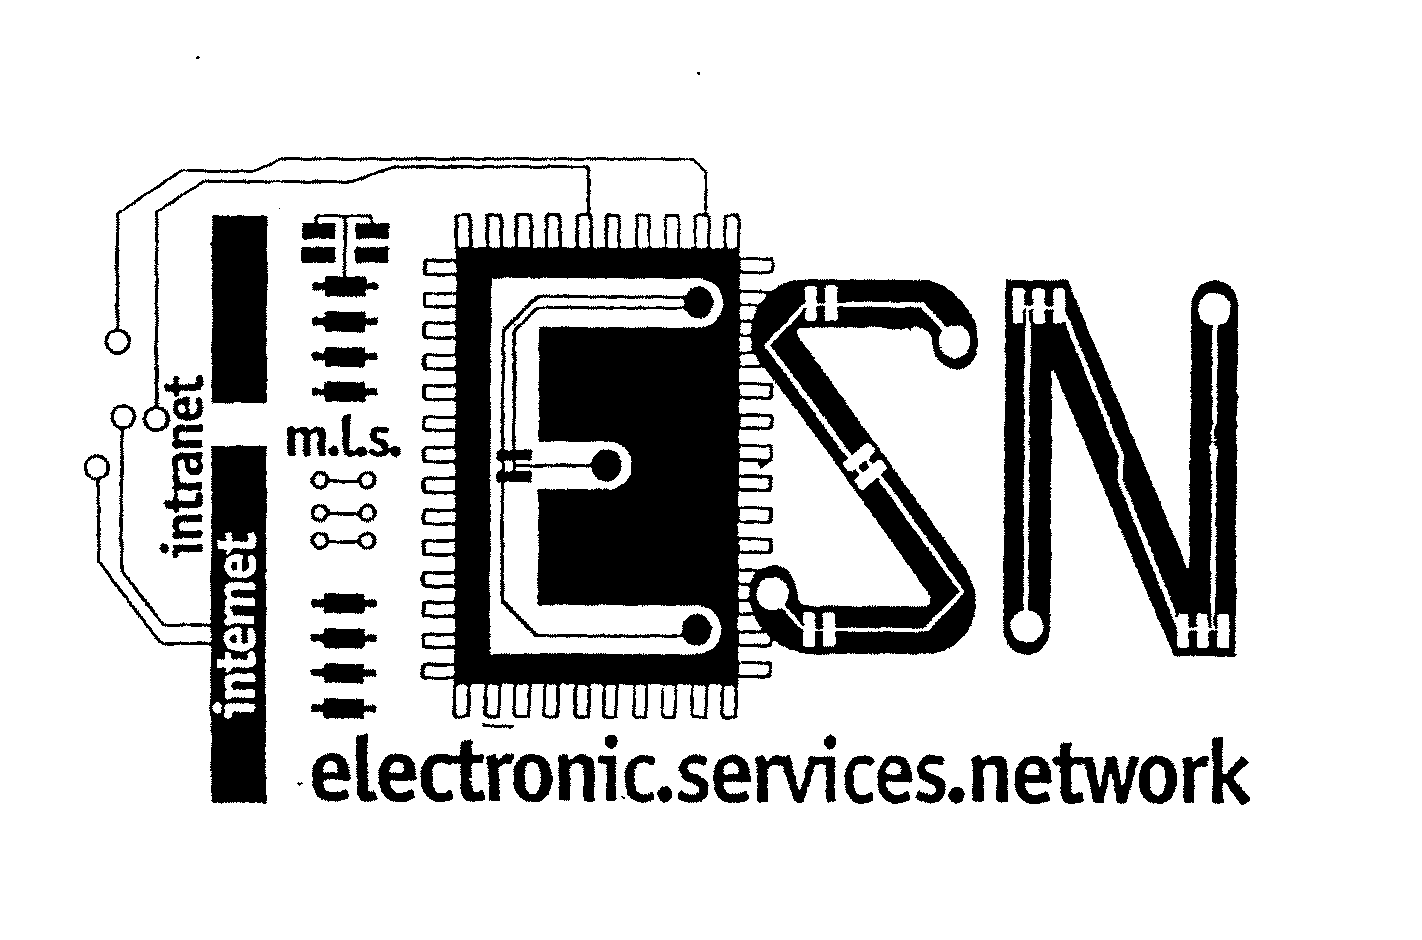  ESN ELECTRONIC.SERVICES.NETWORK INTERNET INTRANET